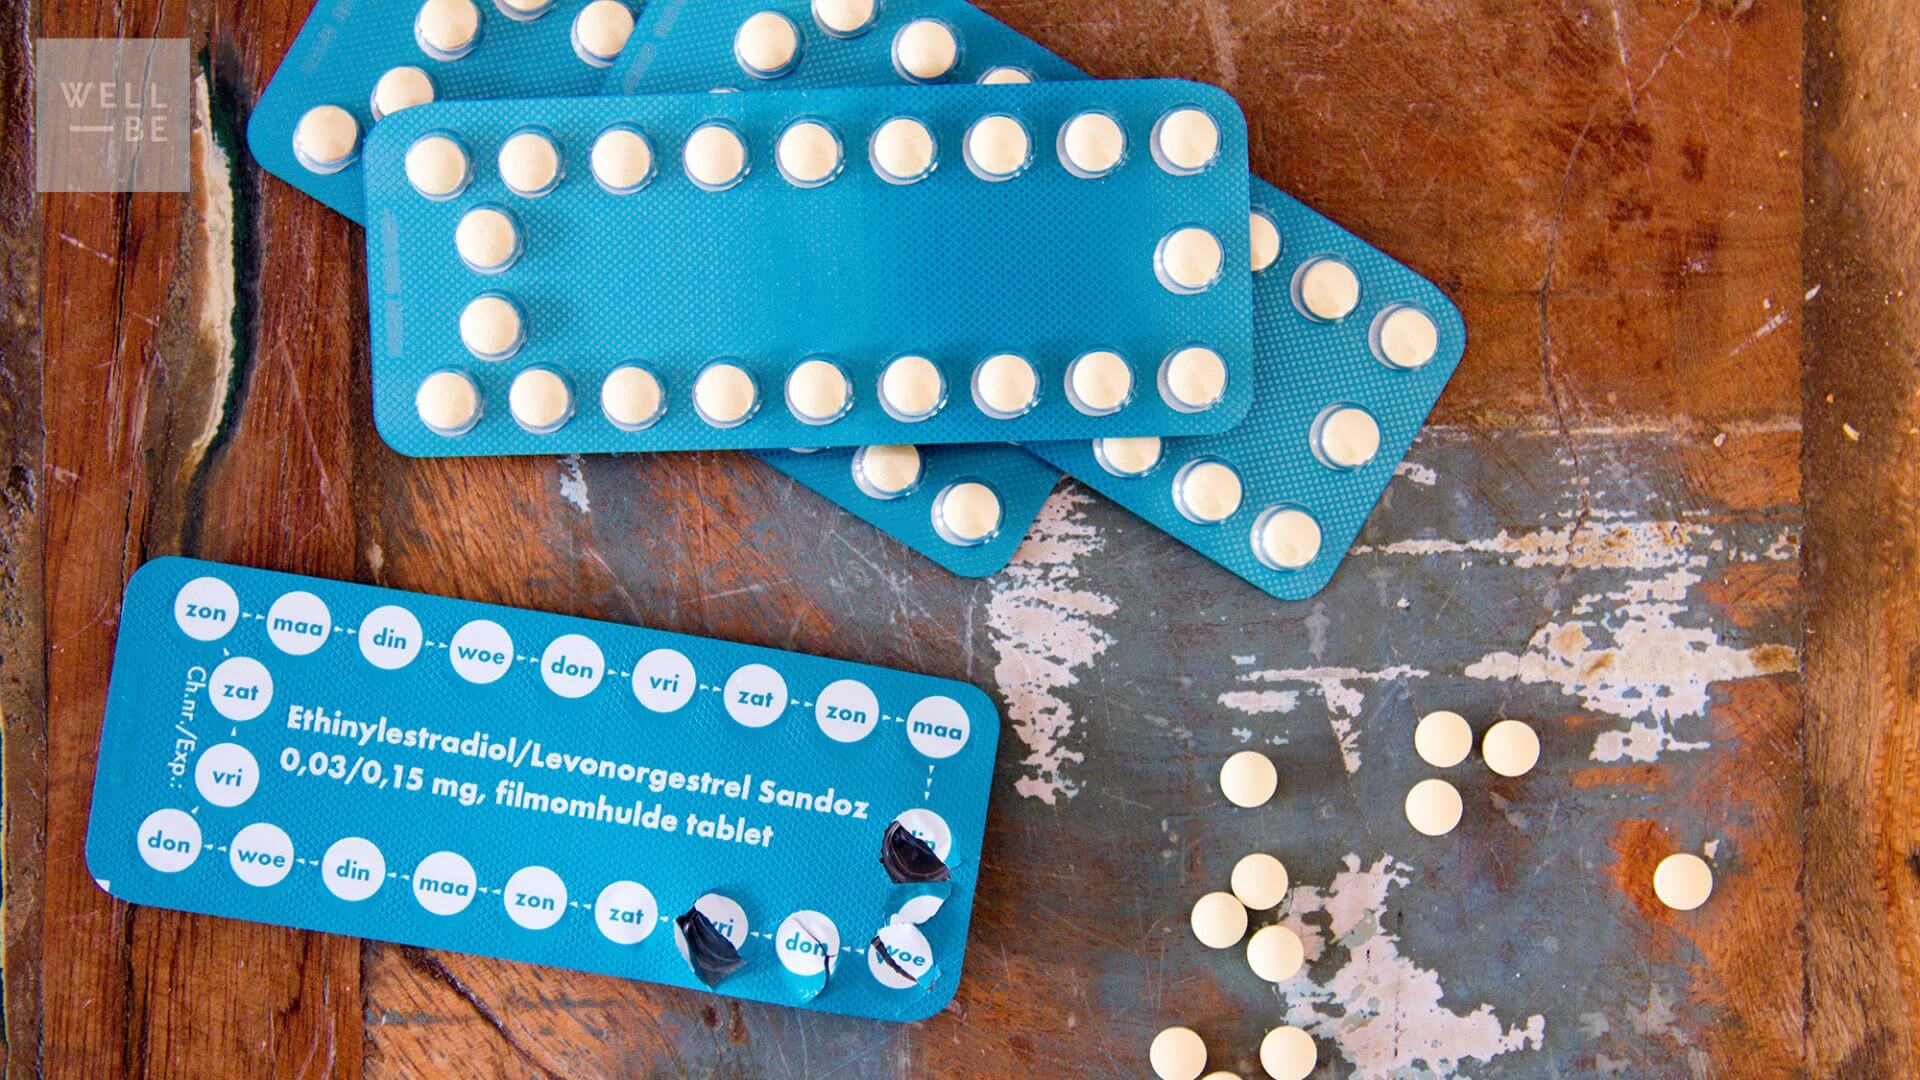 Choosing the best birth control with the least side effects